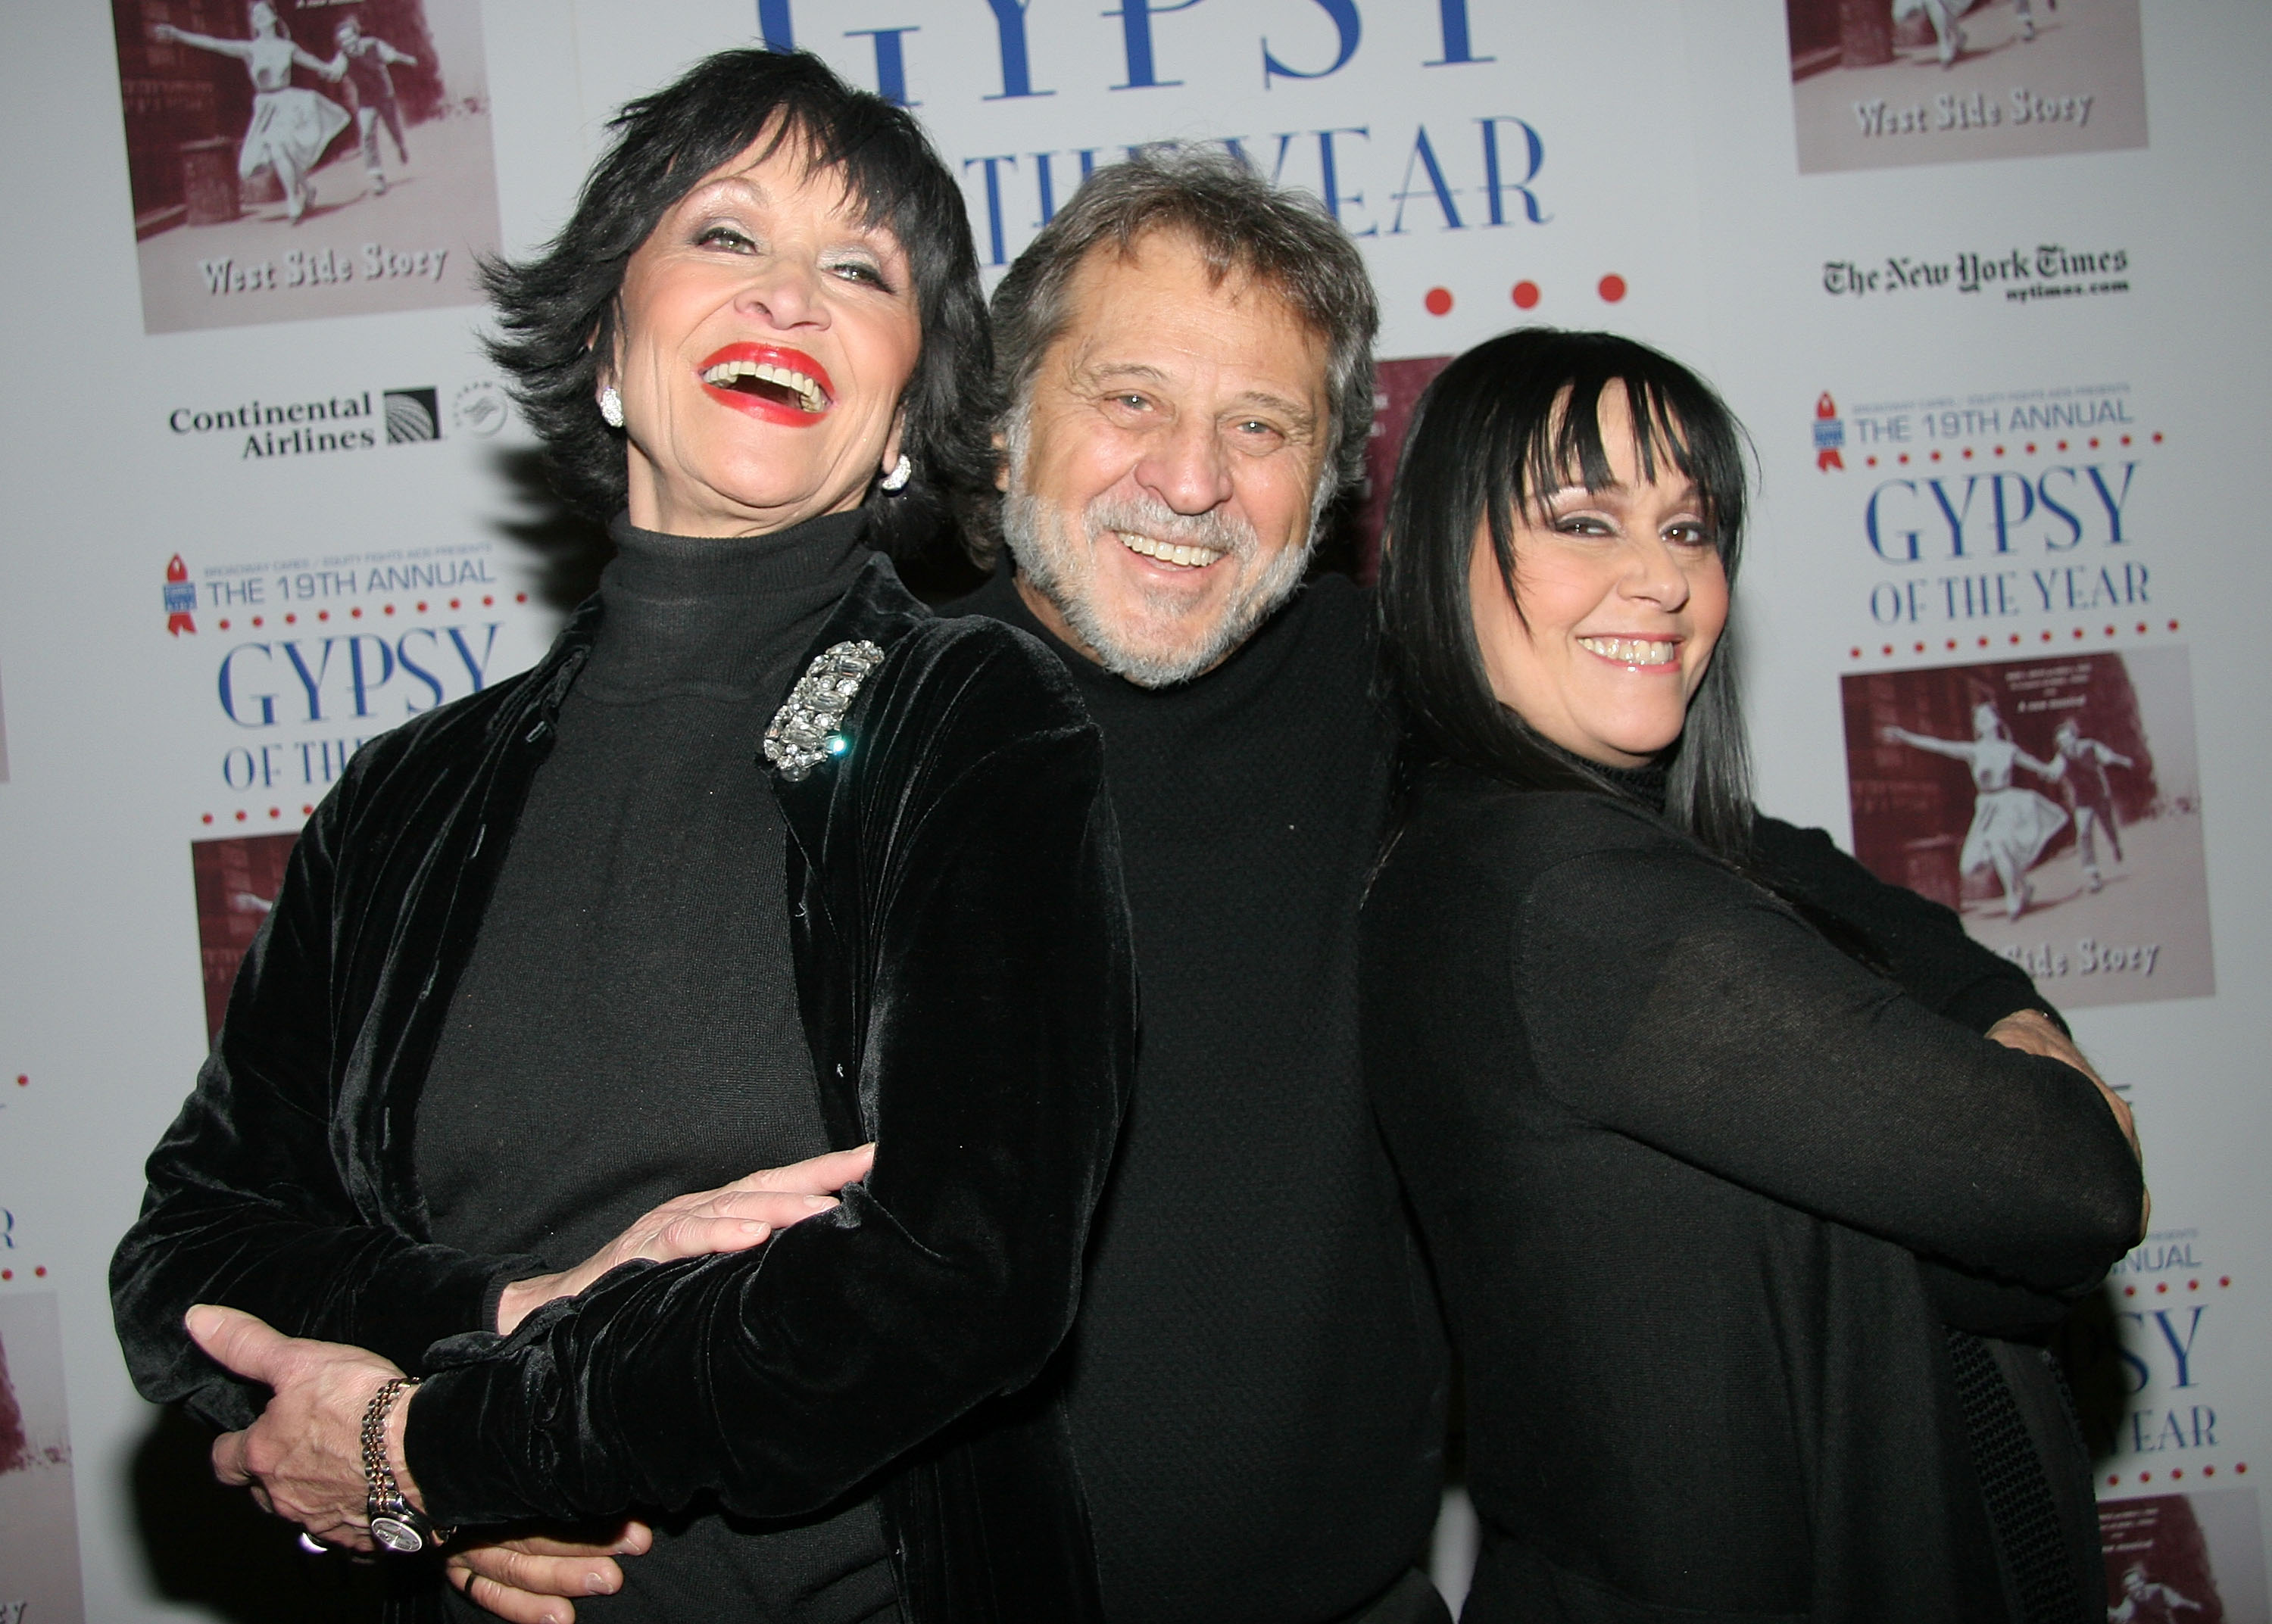 Chita Rivera, Tony Mordente, and their daughter, Lisa Mordente at the 19th Annual Gypsy of the Year Competition in 2007 | Source: Getty Images